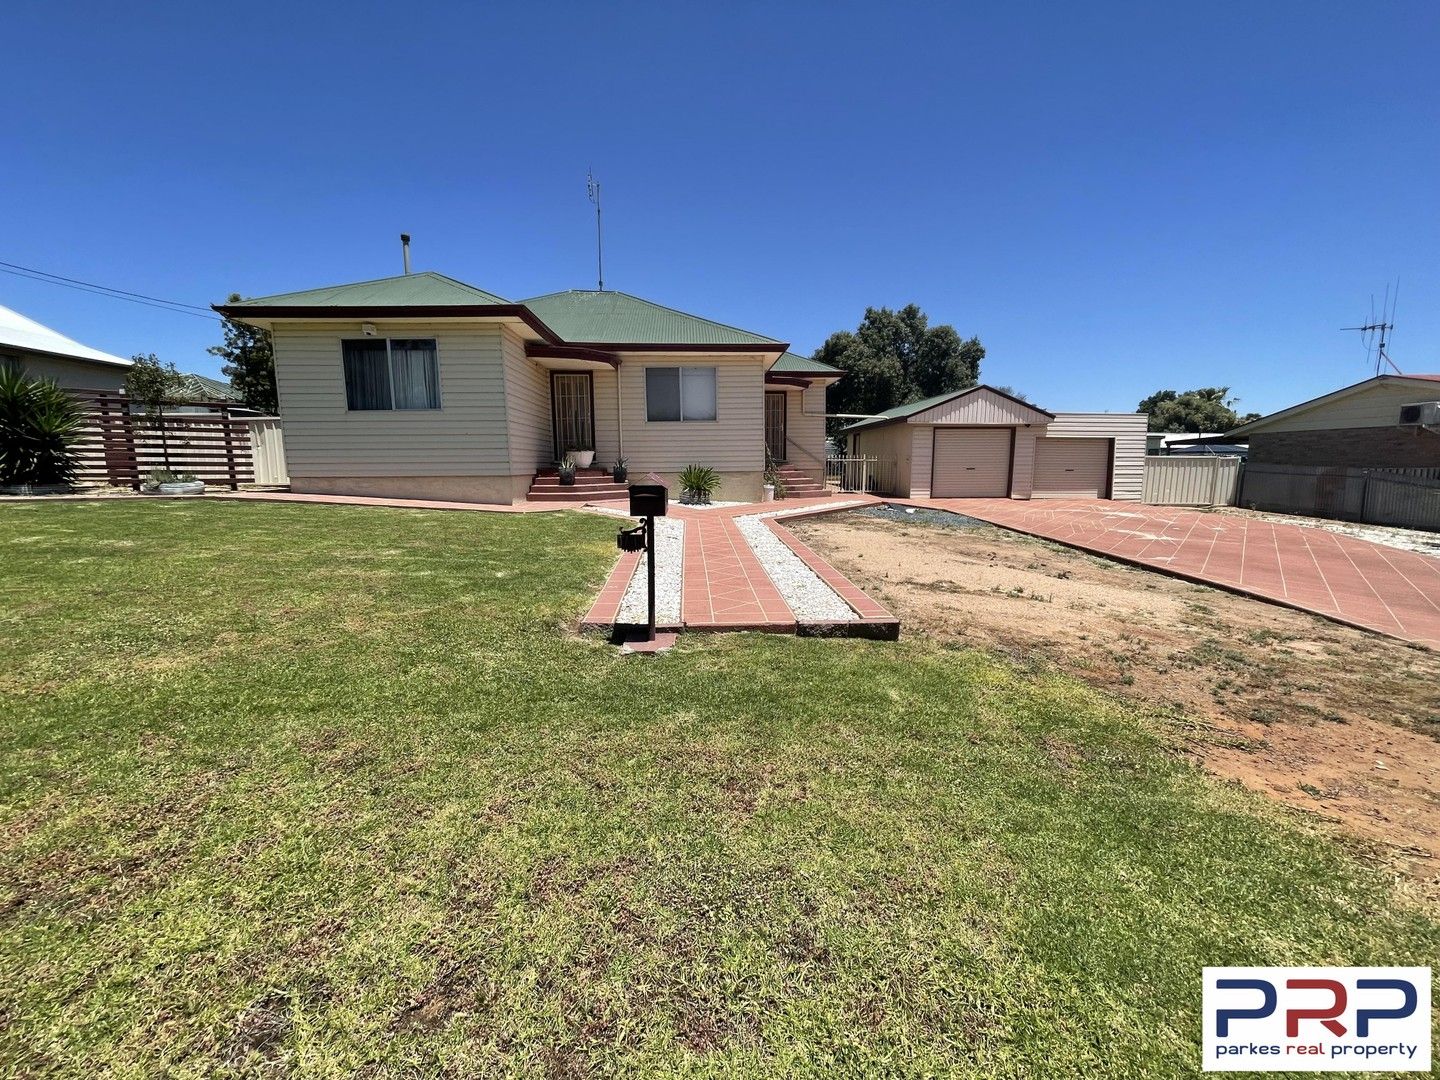 4 bedrooms House in 17-19 Callaghan Street PARKES NSW, 2870